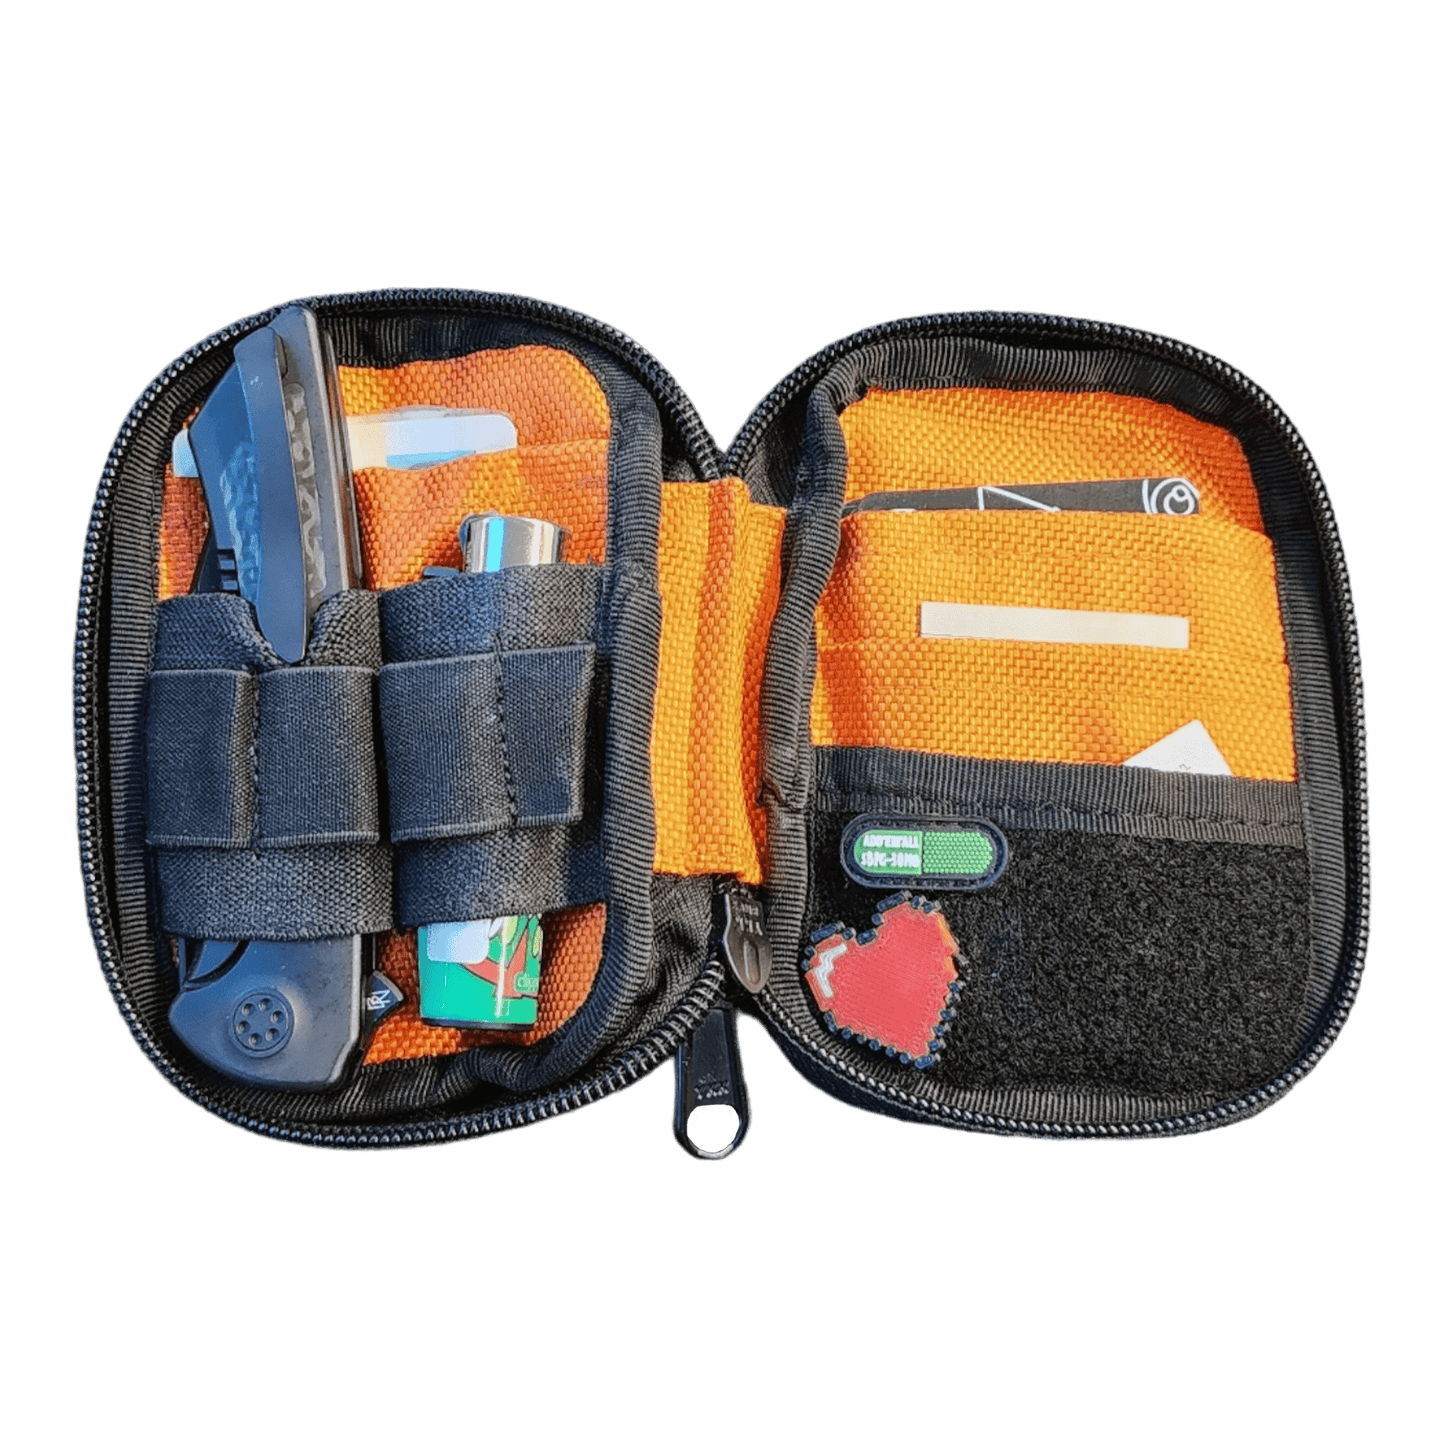 Micro Pouch: Compact, Versatile EDC Organizer - EDC Pouch - SBP-MP-OR-003 - Sticky Back Patch - Micro Pouch: Compact, Versatile EDC Organizer